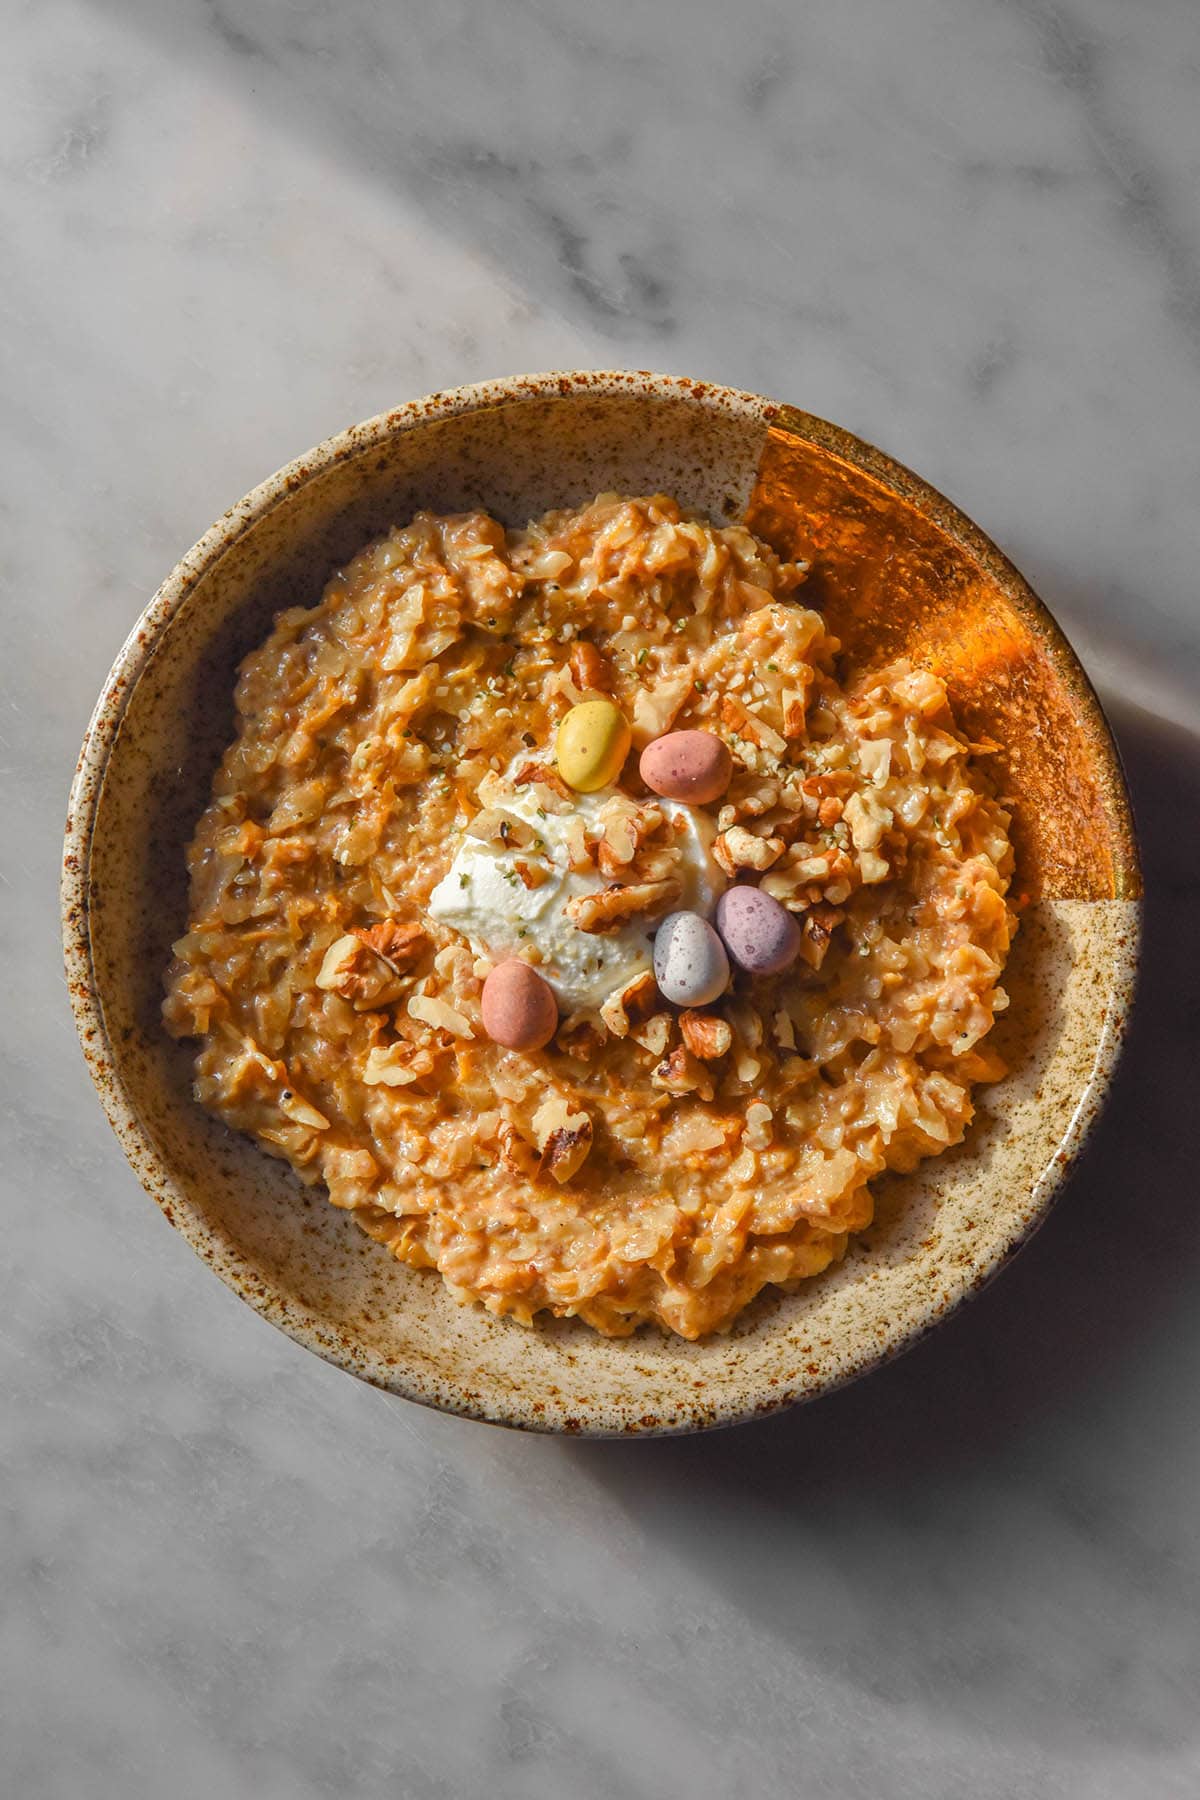 An aerial image of a beige speckled ceramic bowl filled with gluten free carrot cake porridge. The porridge is topped with chopped walnuts, speckled eggs and yoghurt and sits on a white marble table in contrasting sunlight.